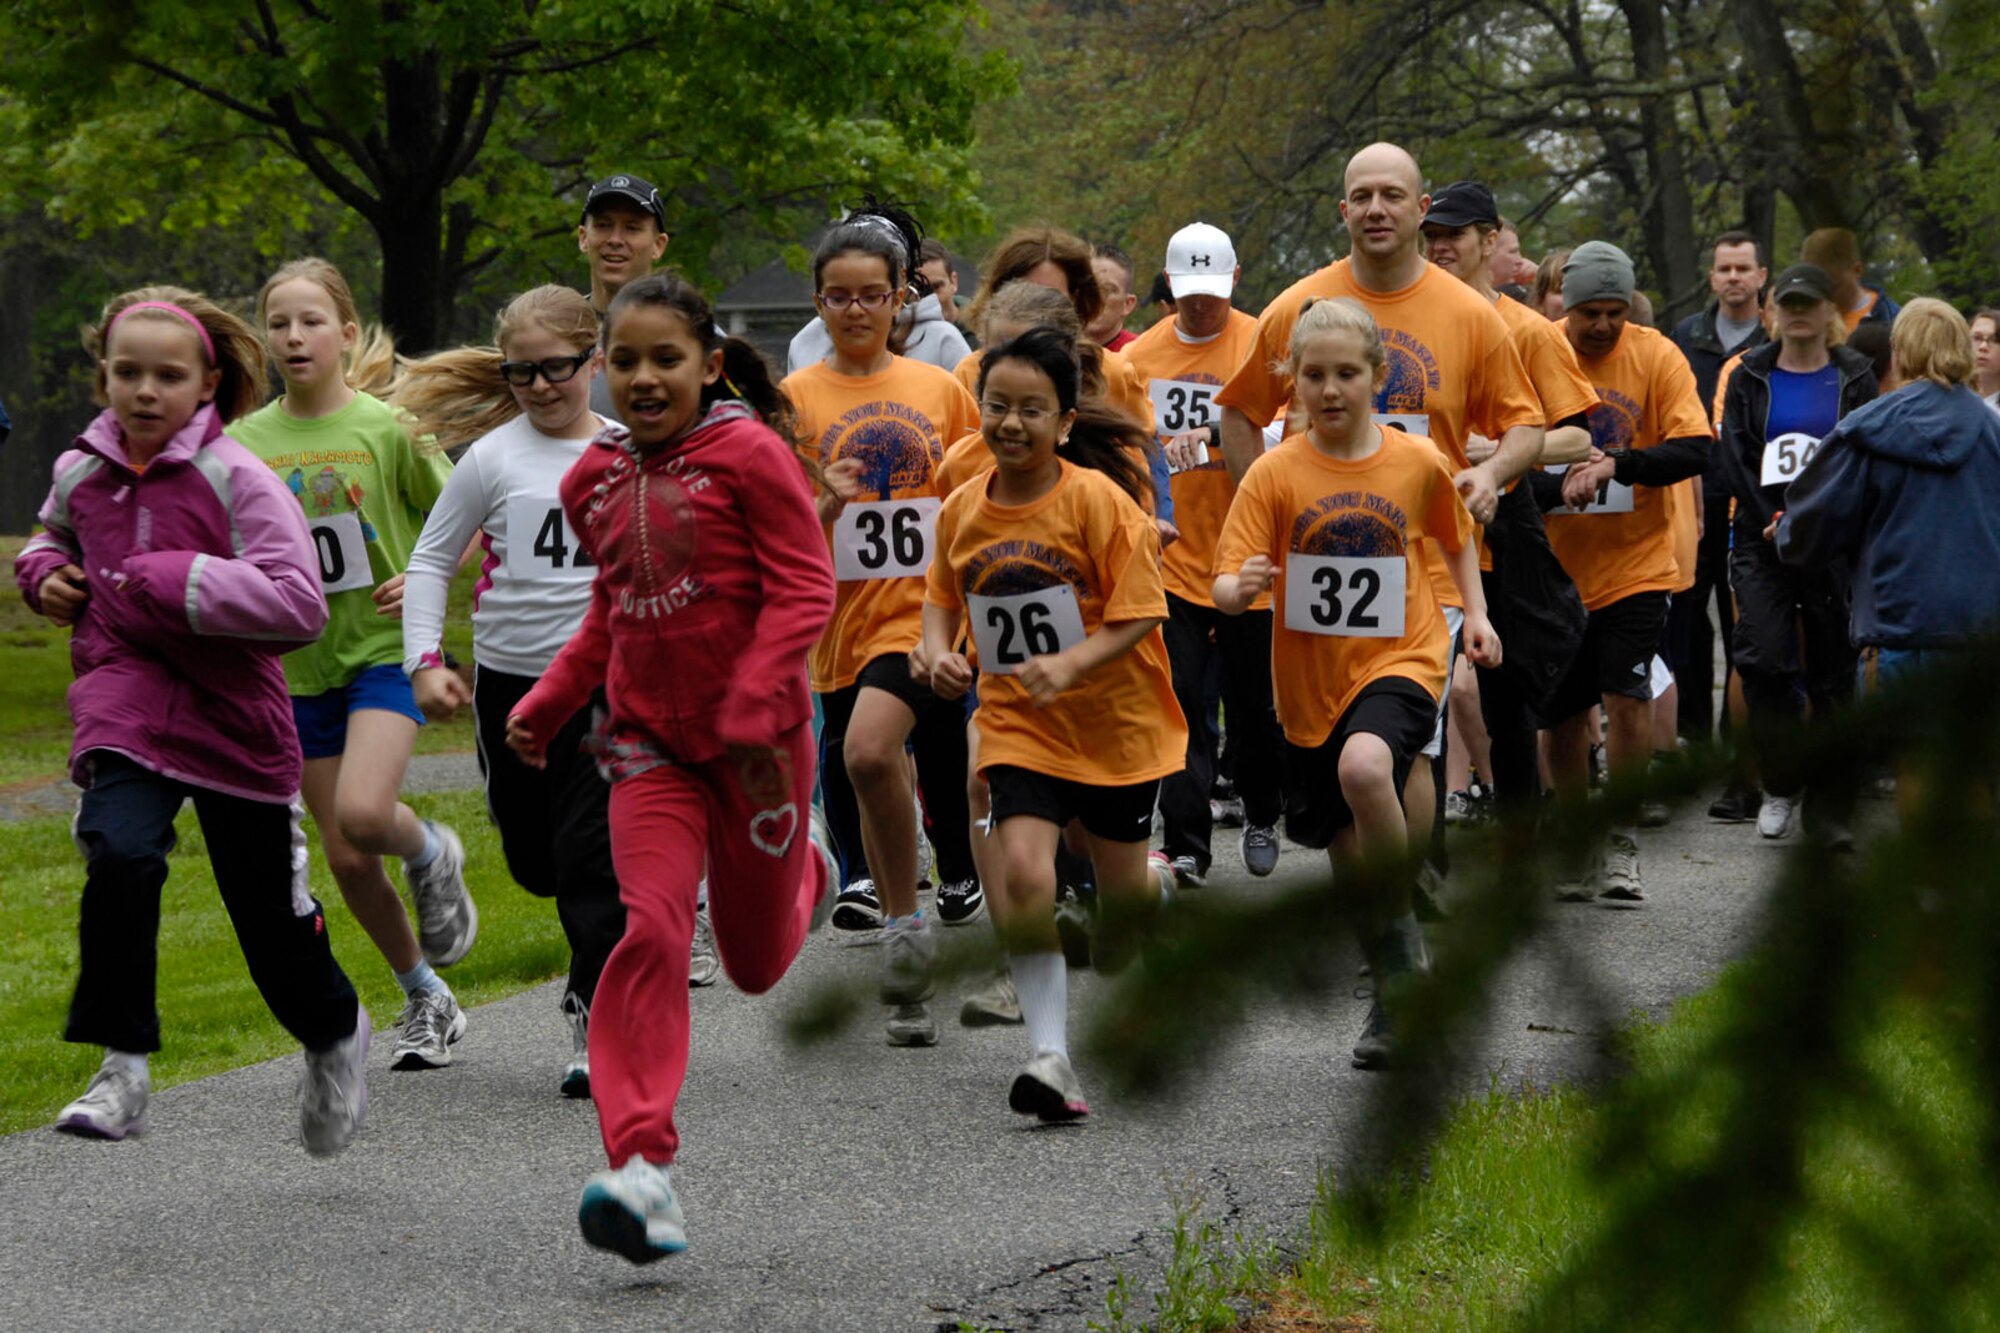 HANSCOM AIR FORCE BASE, Mass. – Hanscom Middle School students and their parents take off for the HOPA race at Castle Park May 18. This is the 26th running of the race, named after the Hopa Crabapple trees planted many years ago near the finish line of the three mile race. (U.S. Air Force photo by Linda LaBonte Britt)